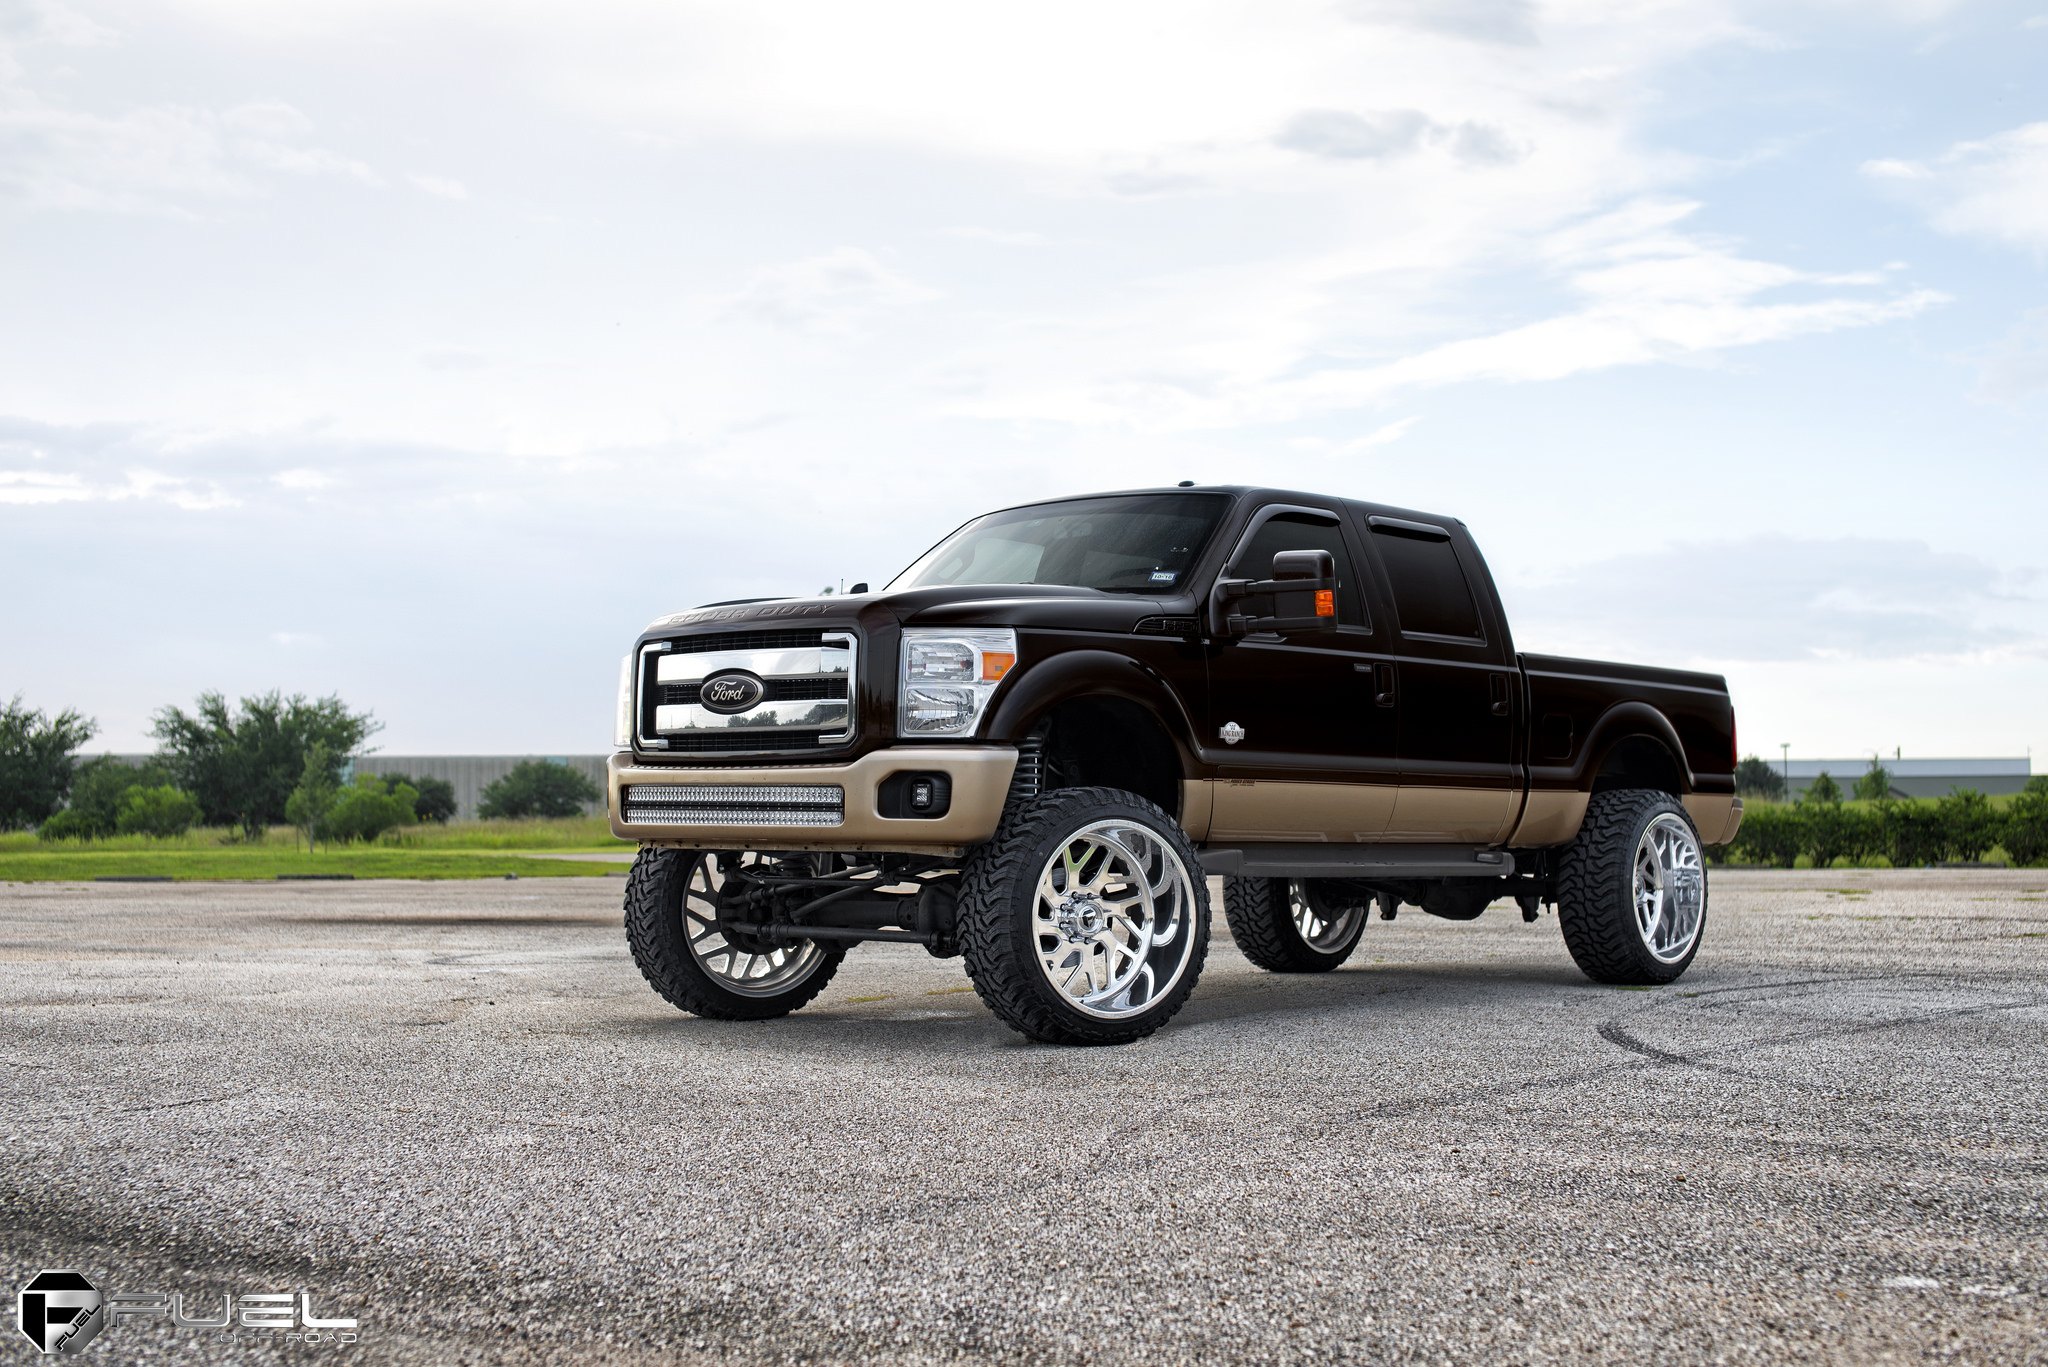 Black Ford F-250 Super Duty with Chrome Grille - Photo by Fuel Offroad